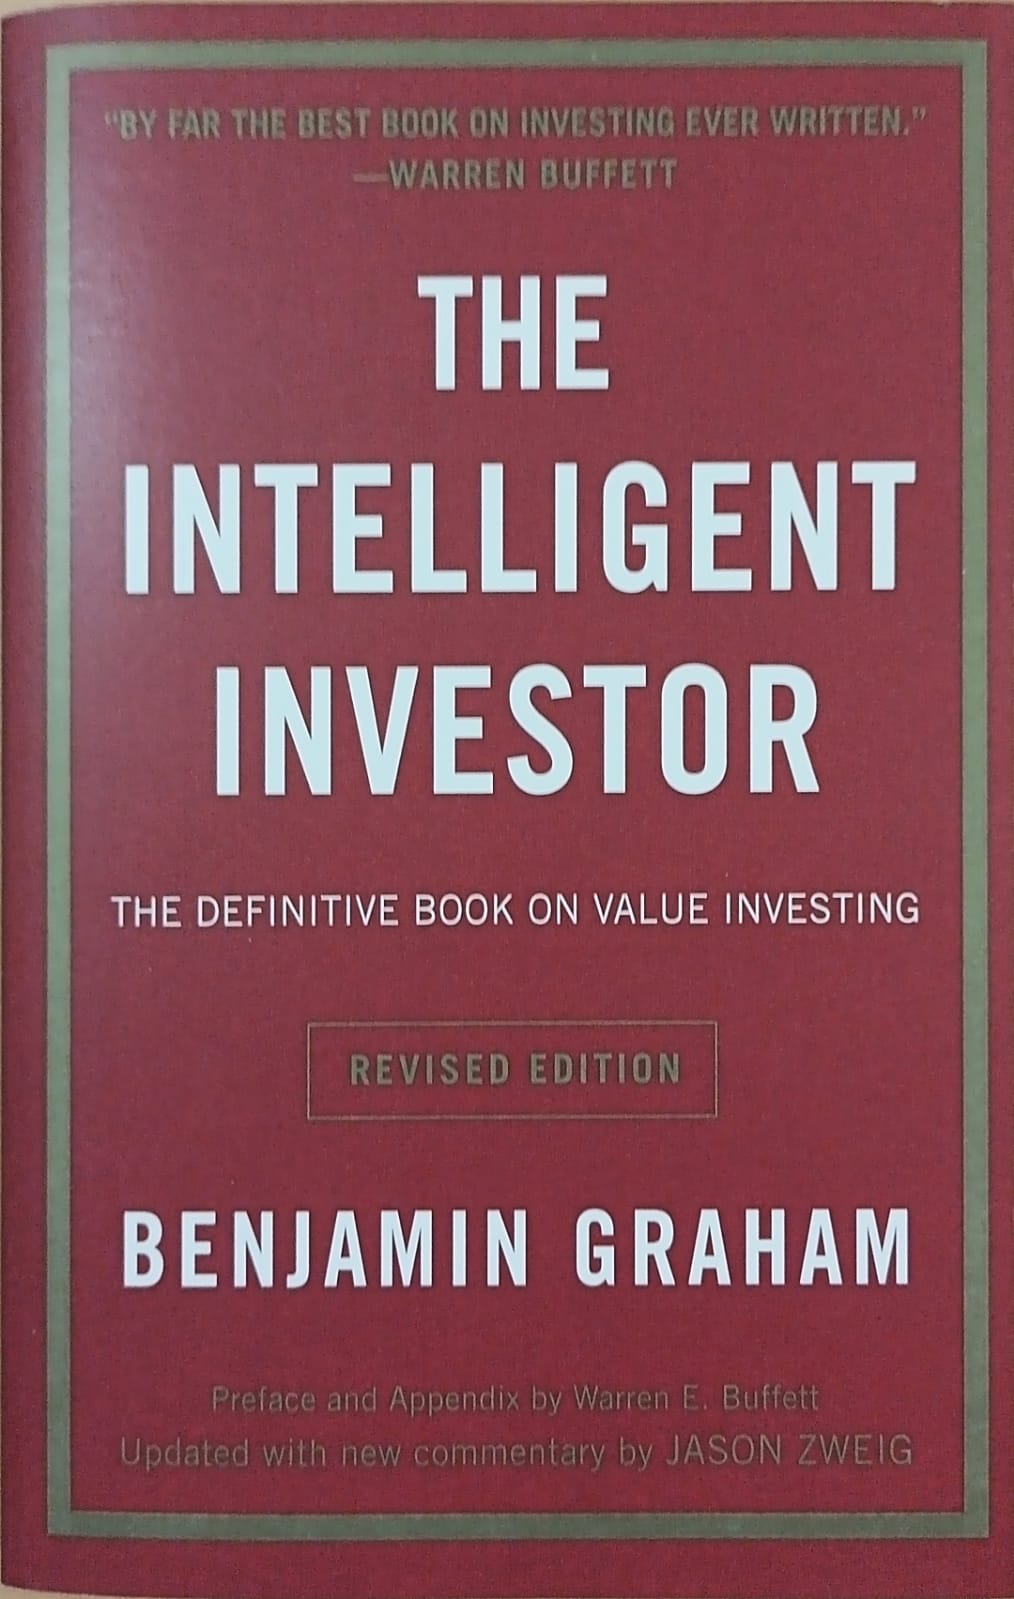 The intelligent investor: a book of practical counsel revised edition